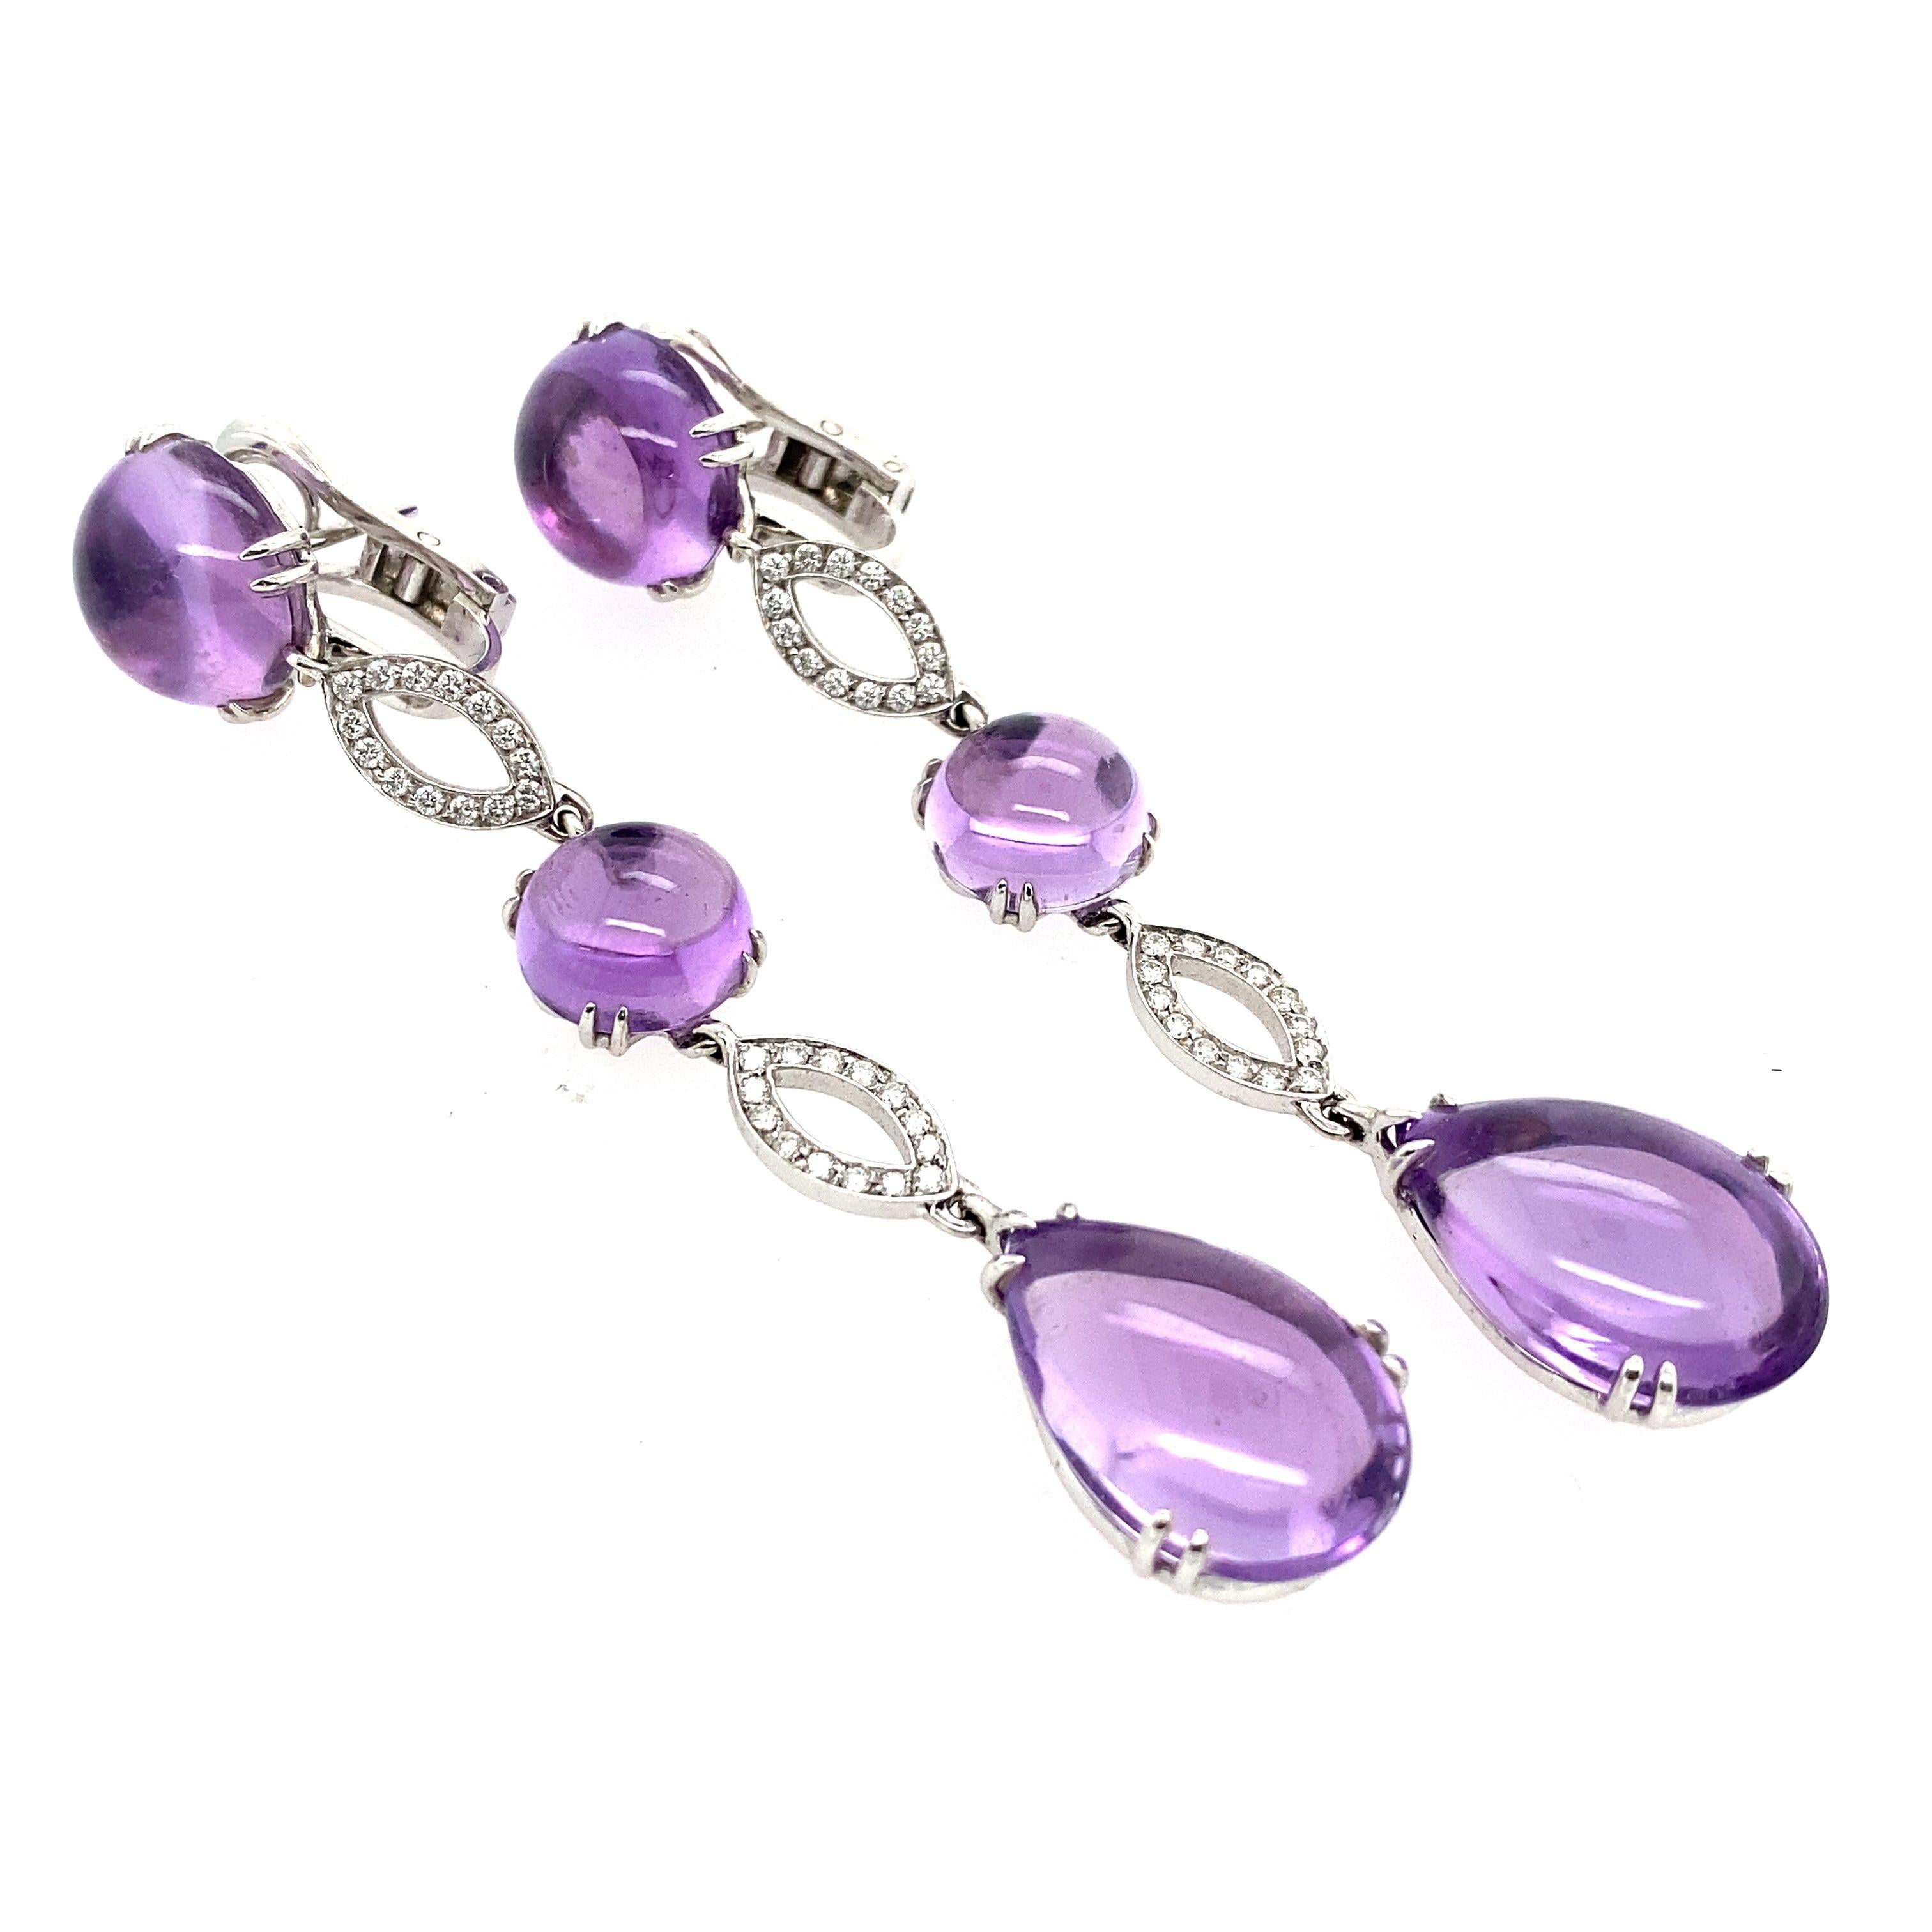 The design of these earrings is inspired by the raindrops on a rainy day. The amethyst is a symbol of peace, protection, and passion.  These drop earrings are a statement piece and will go with any outfit.
Total Diamond Weight: 0.50ct 
Diamond